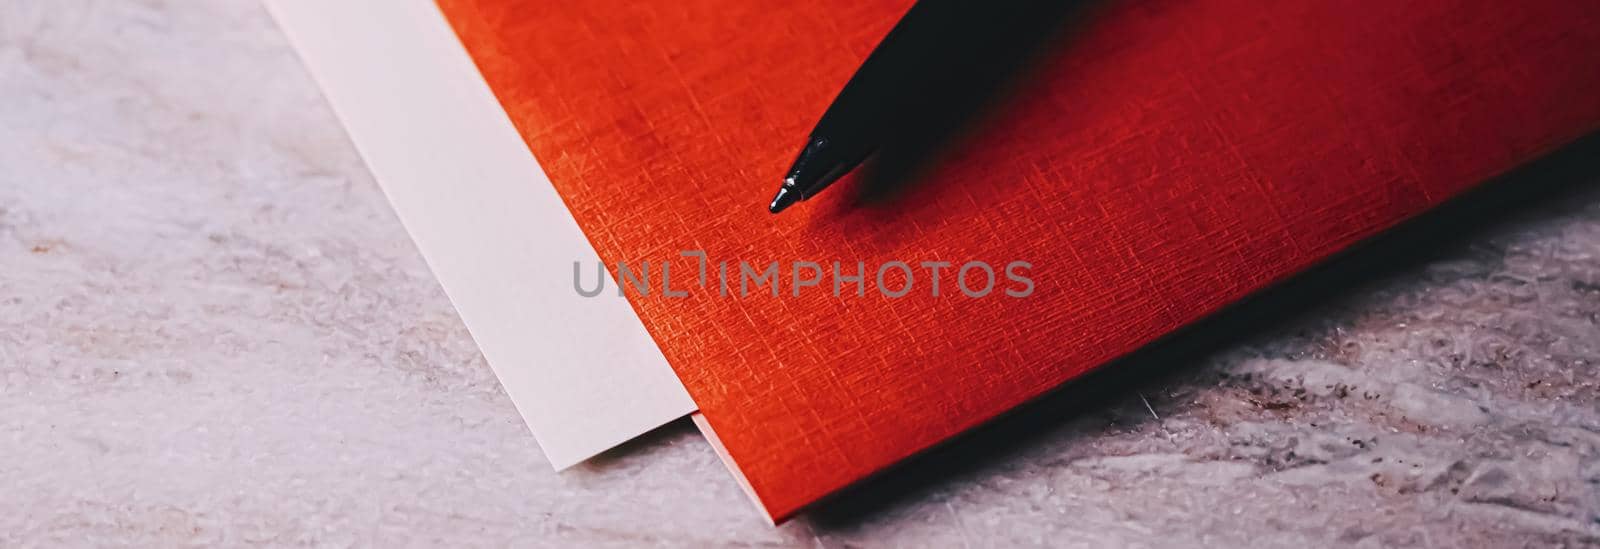 Pen and papers as office stationery by Anneleven